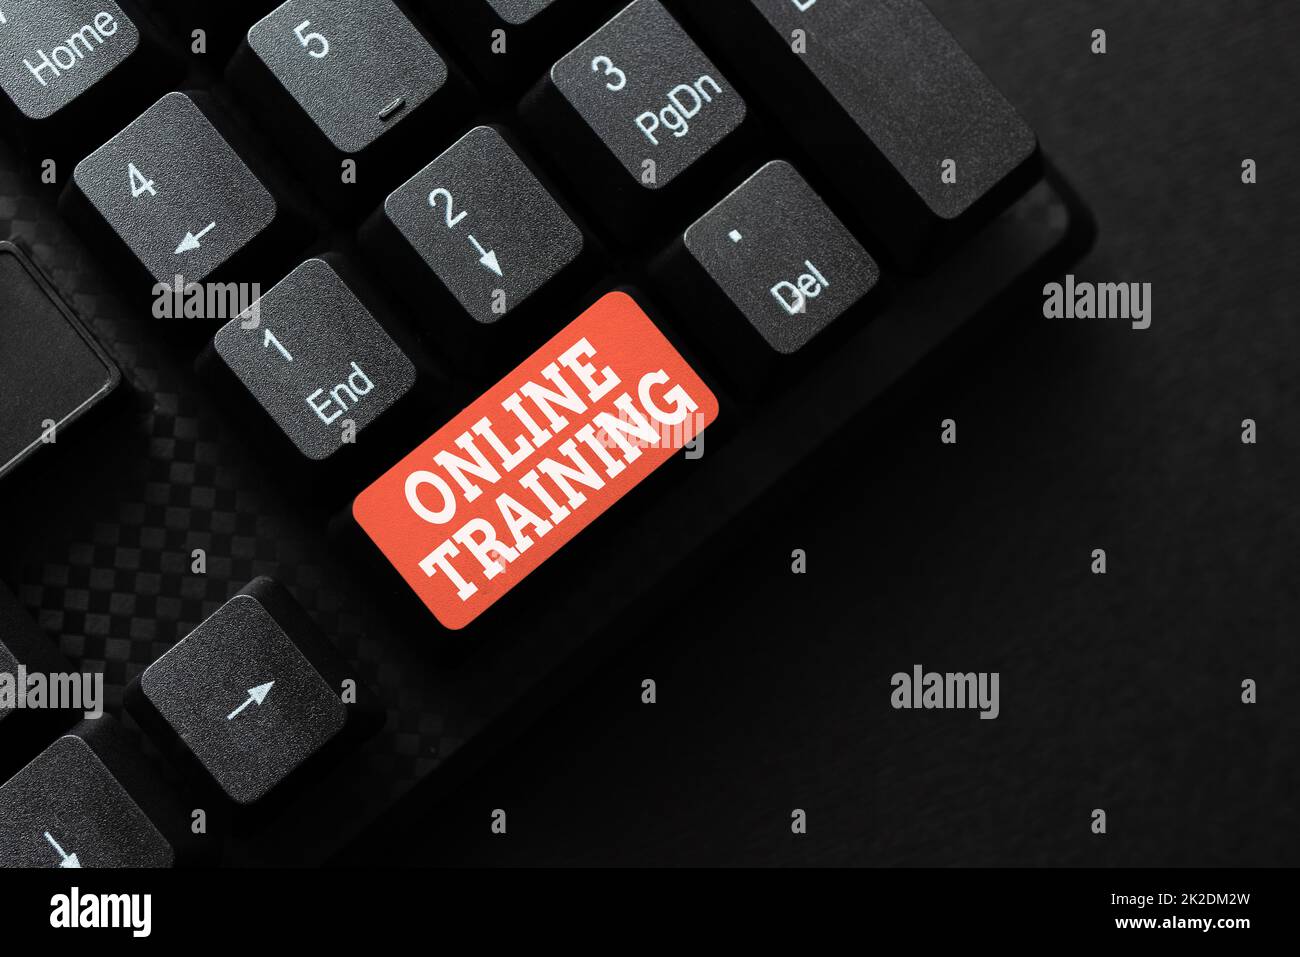 Writing displaying text Online Training. Word Written on Computer based training Distance or electronic learning Retyping Download History Files, Typing Online Registration Forms Stock Photo